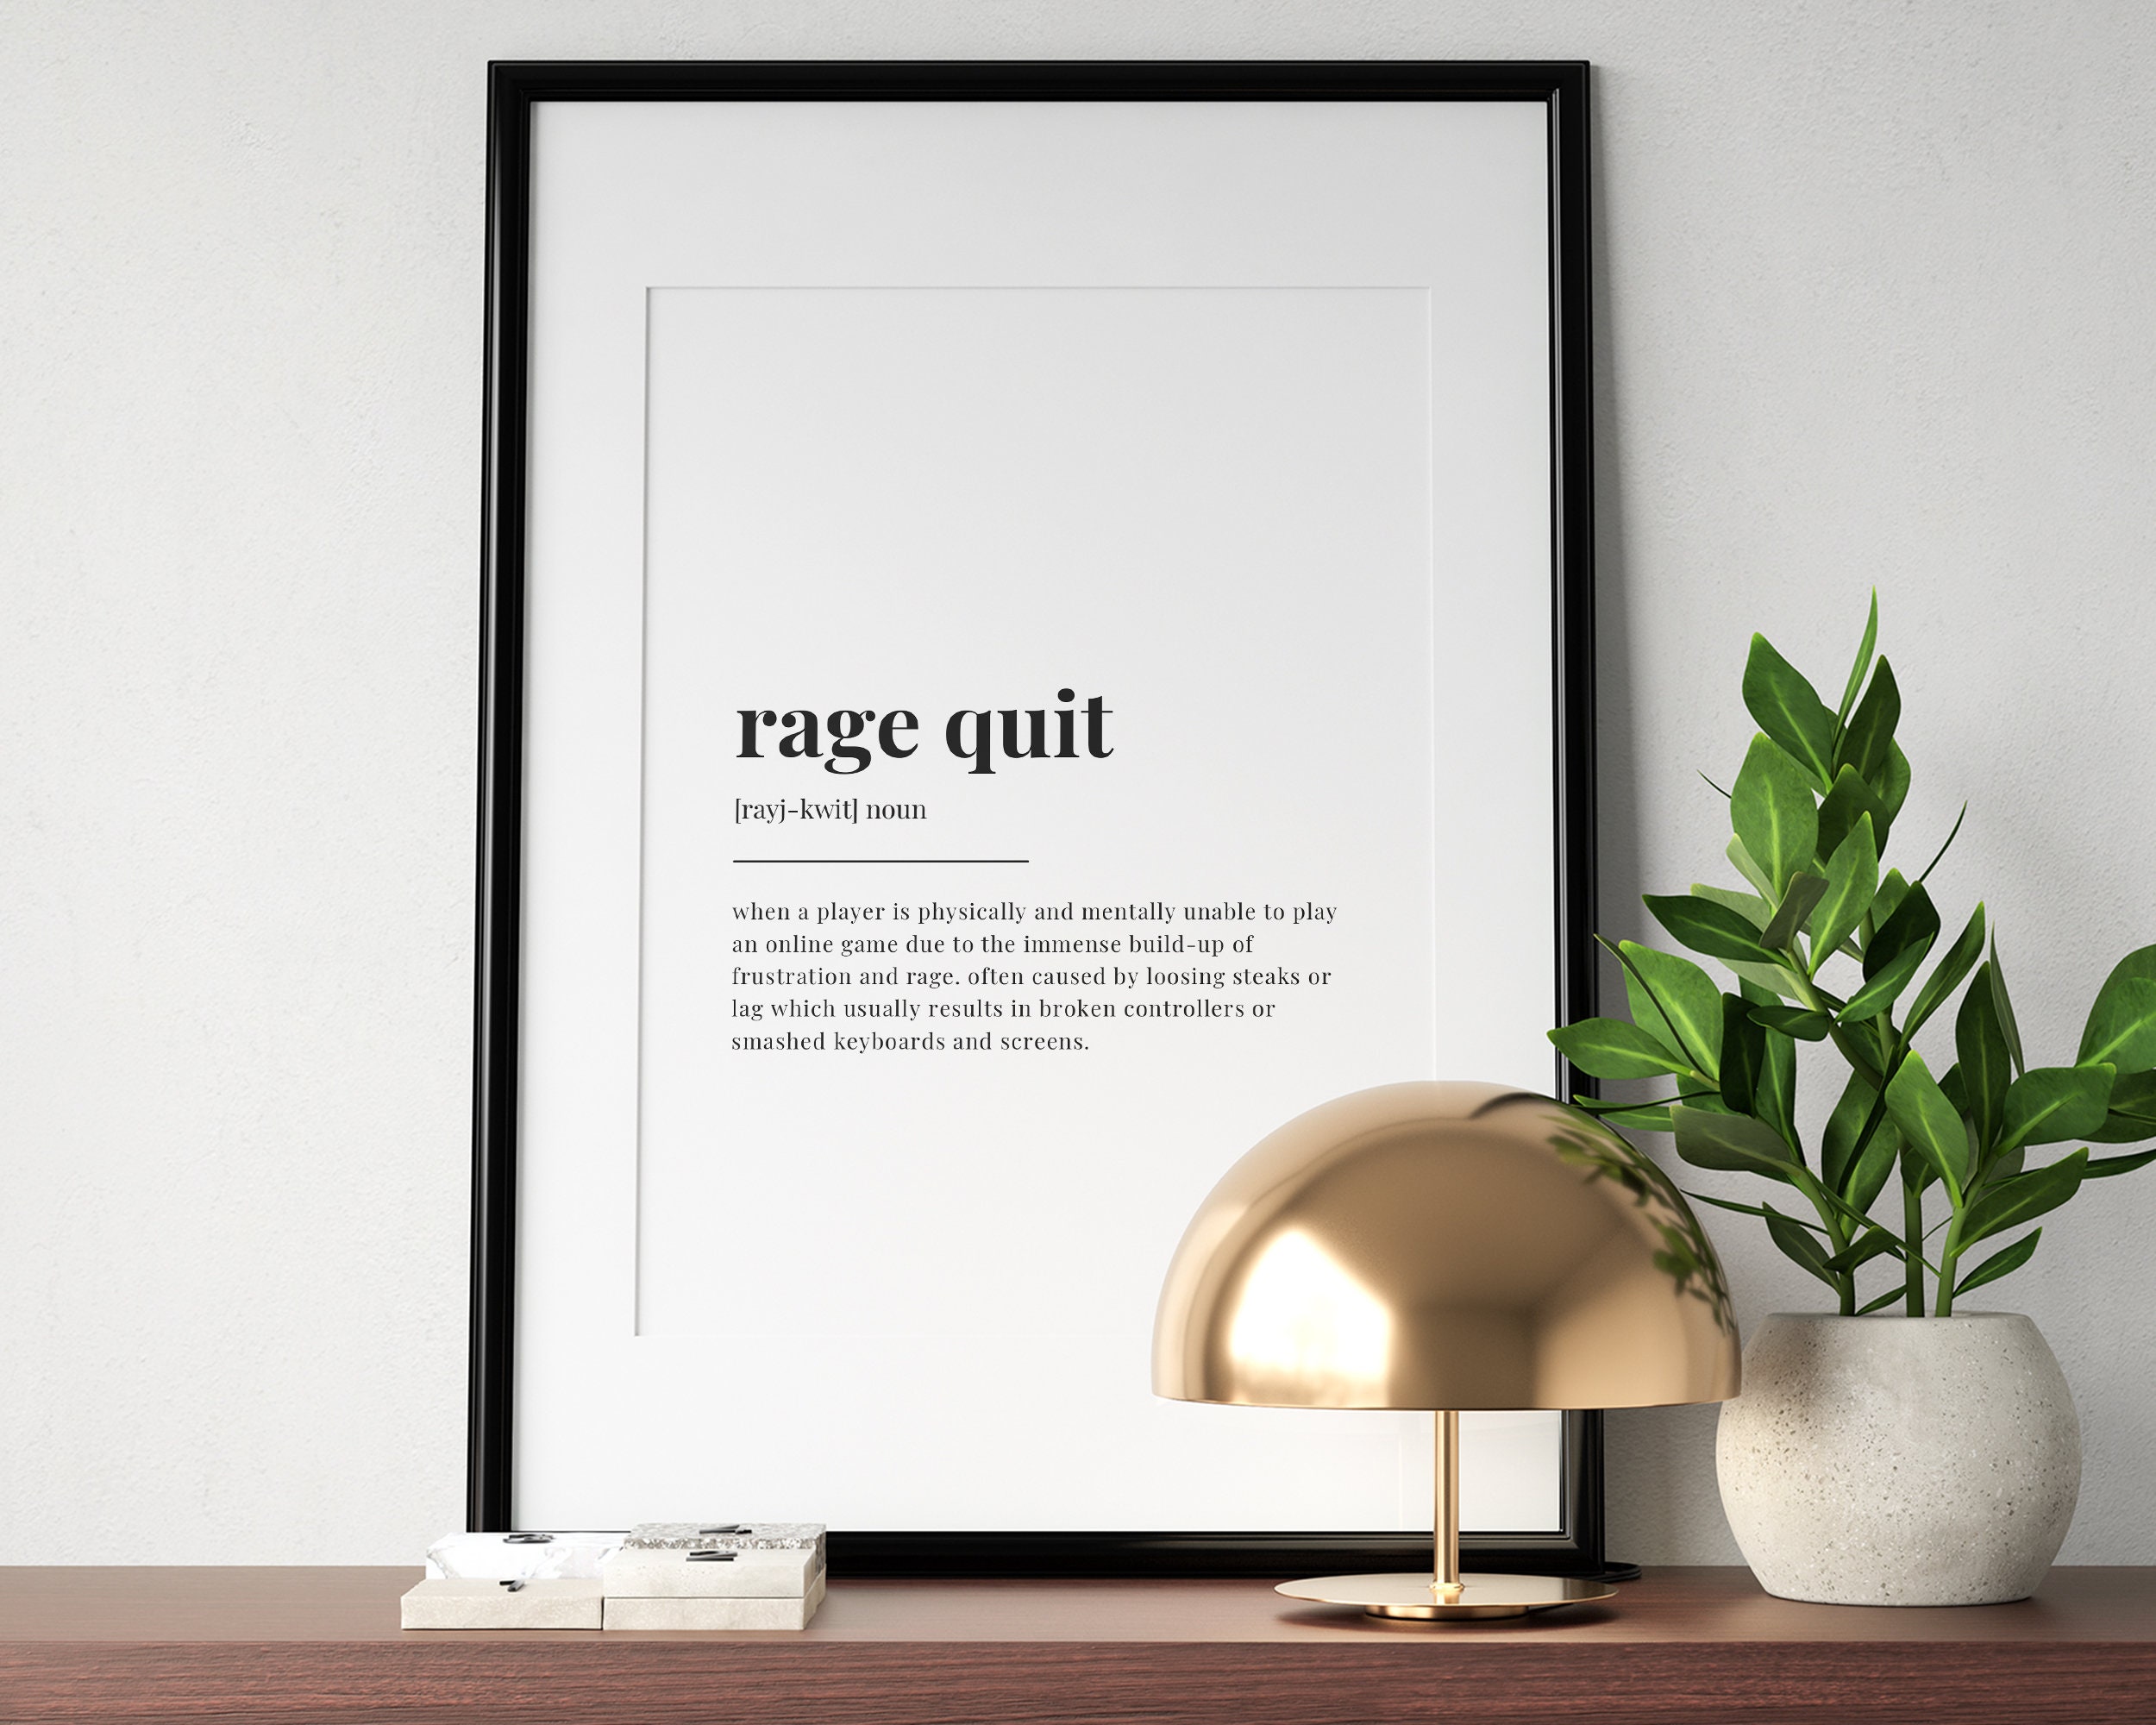 Rage - Quit Definition Dictionary Word Meaning Wall Prints Canvas Wall Art  with Saying Farmhouse Wall Art Painting Modern Wall Decor for Home School